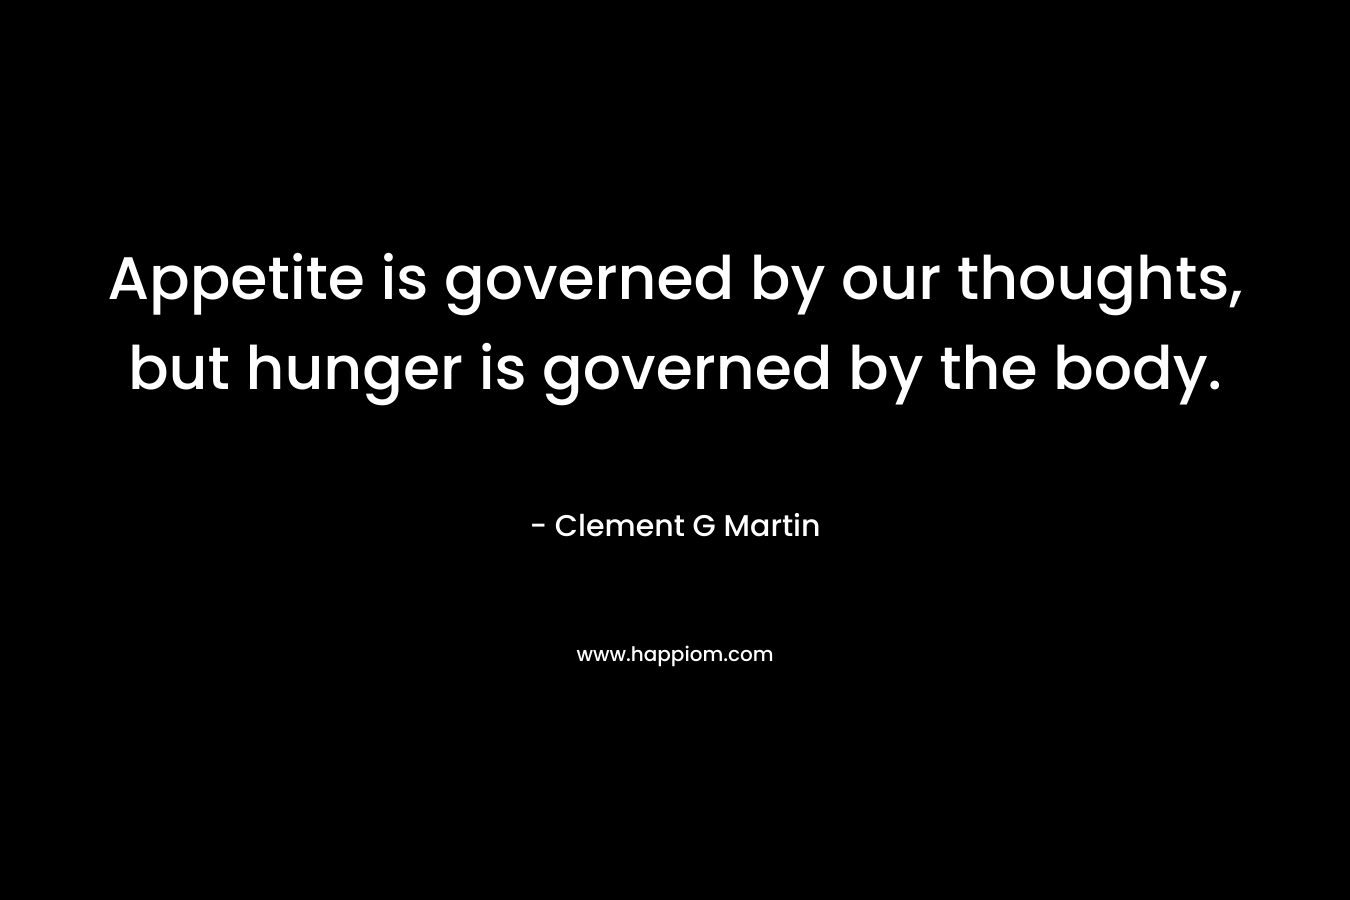 Appetite is governed by our thoughts, but hunger is governed by the body. – Clement G Martin